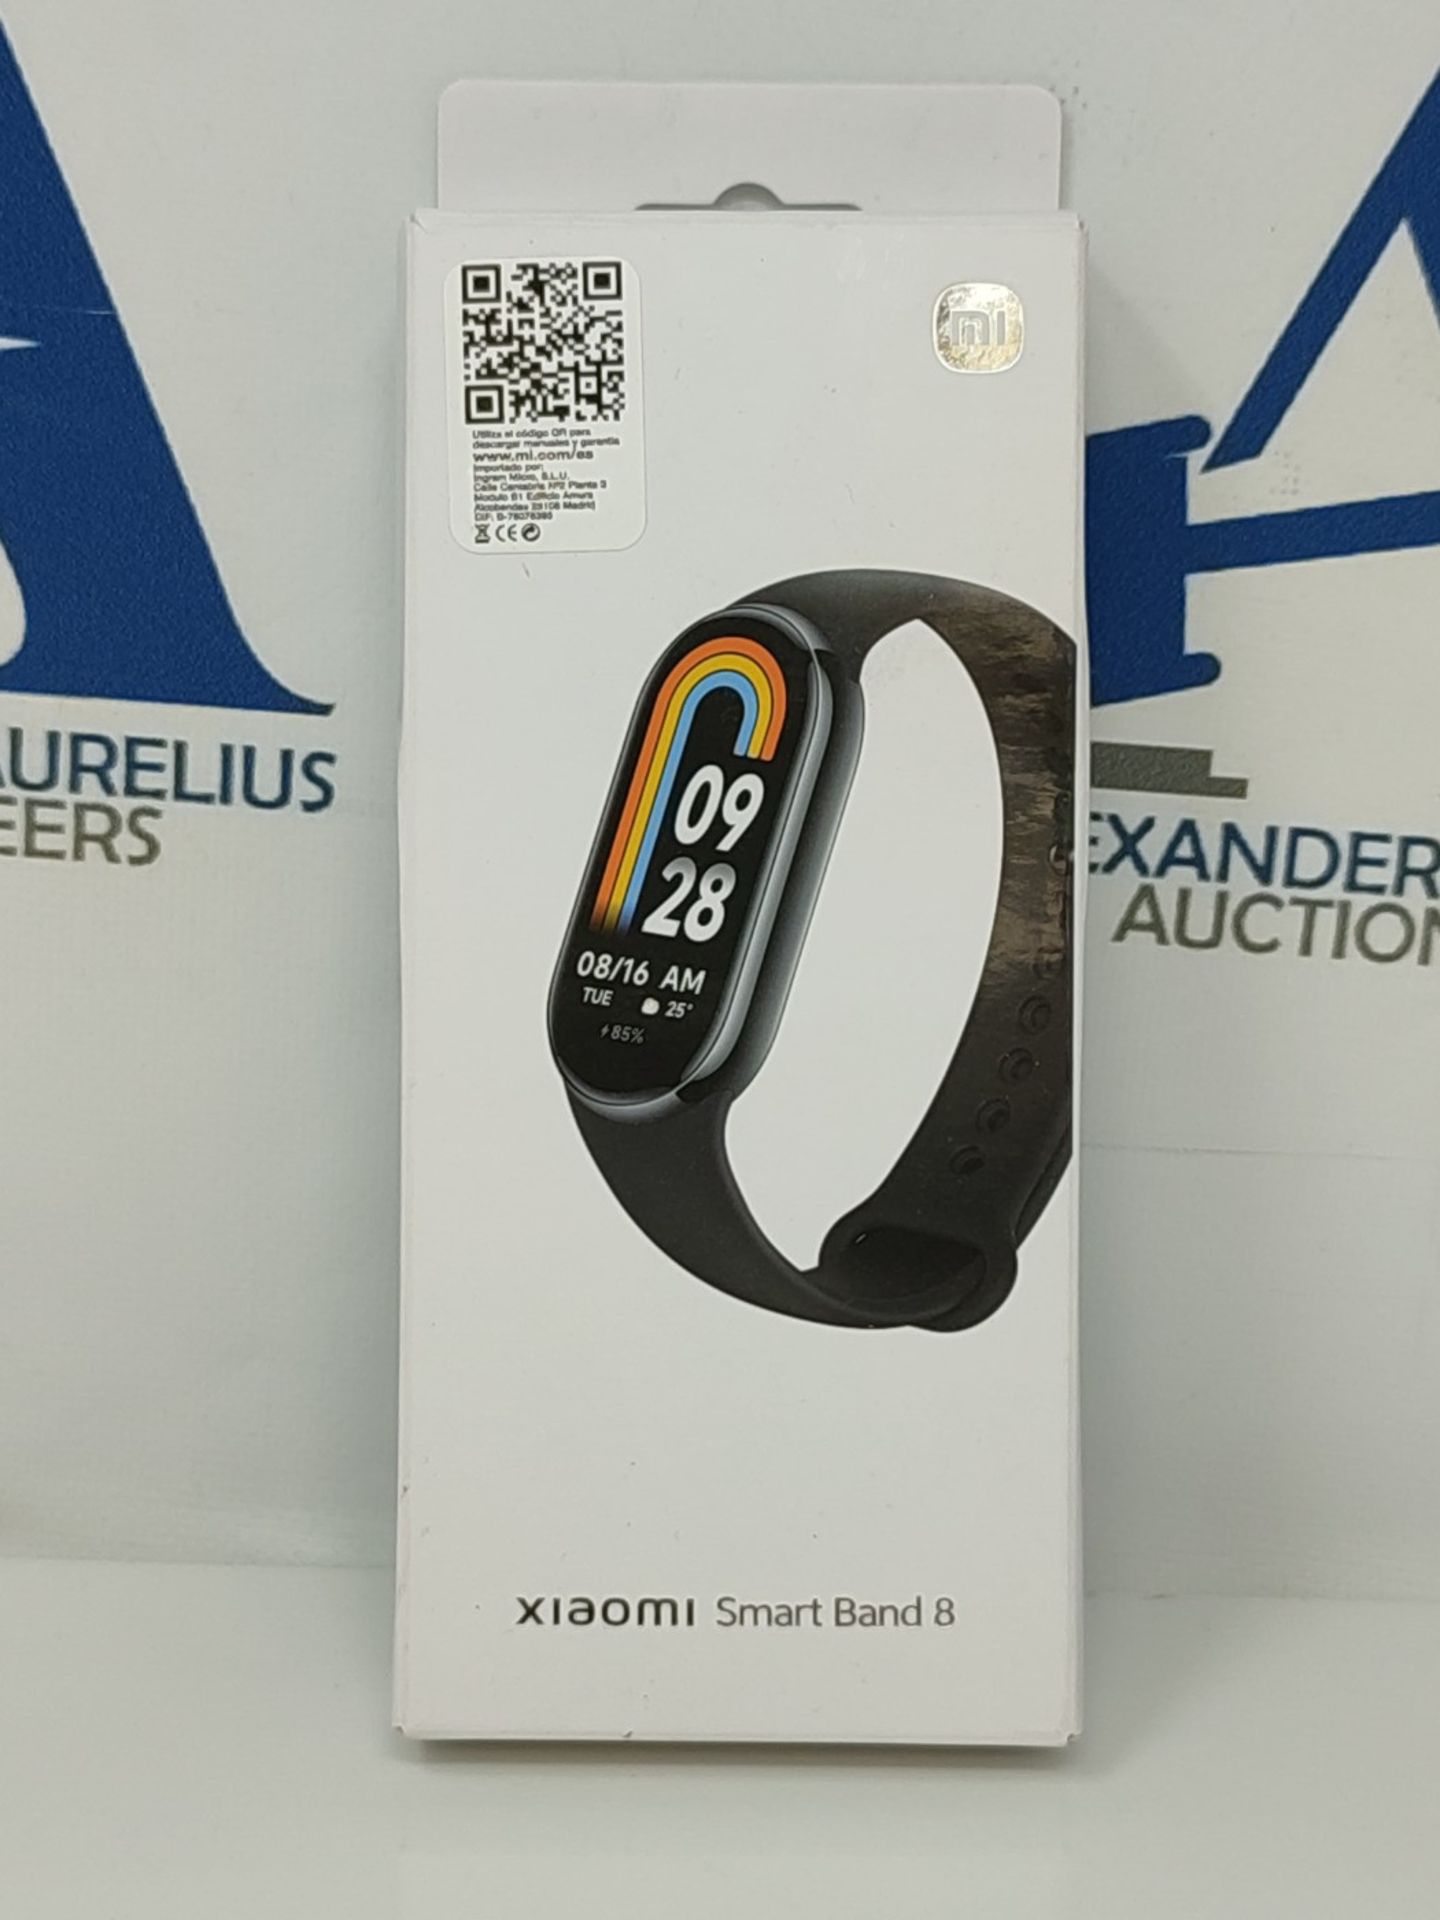 Xiaomi Smart Band 8 Fitness Tracker, 1.62" AMOLED Display, 16 days battery life, 5ATM, - Image 2 of 3